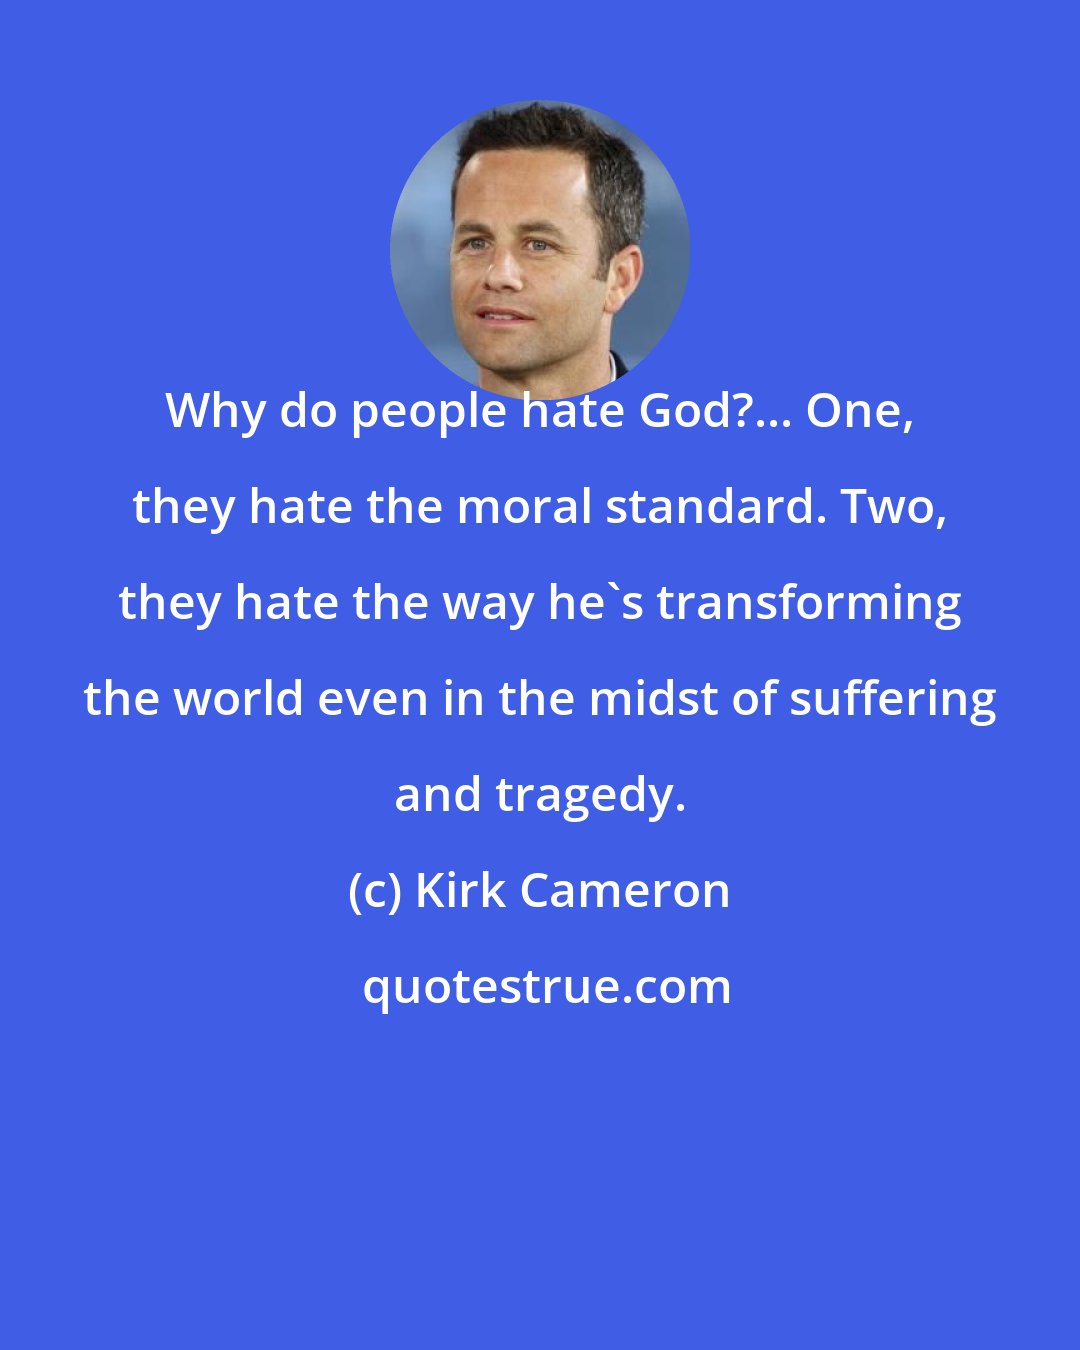 Kirk Cameron: Why do people hate God?... One, they hate the moral standard. Two, they hate the way he's transforming the world even in the midst of suffering and tragedy.